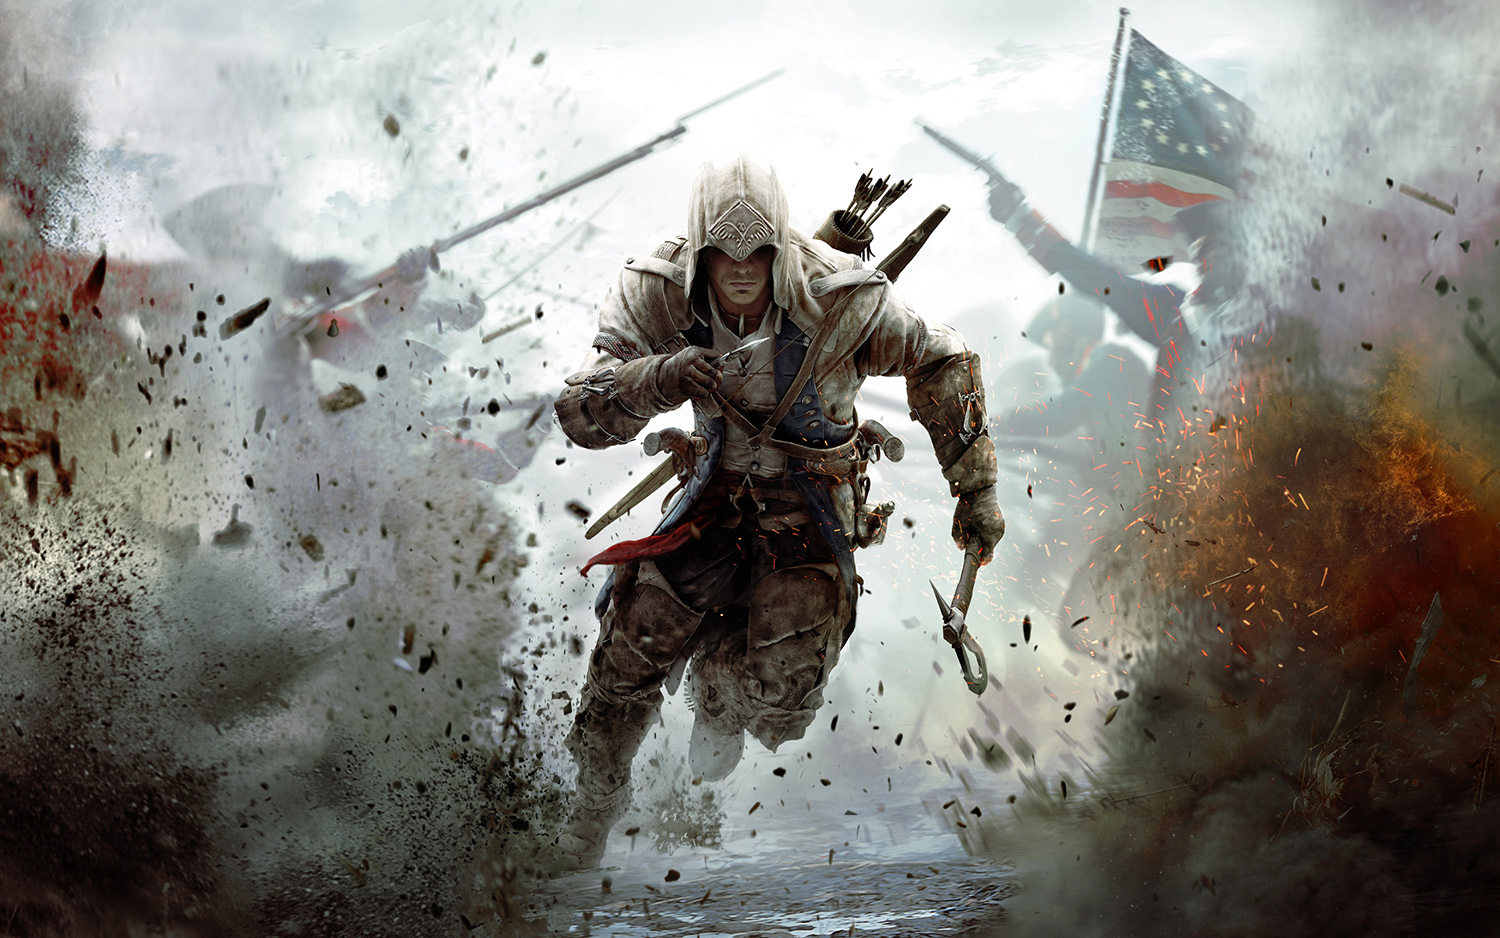 Assassin's Creed III – Lexington and Concord